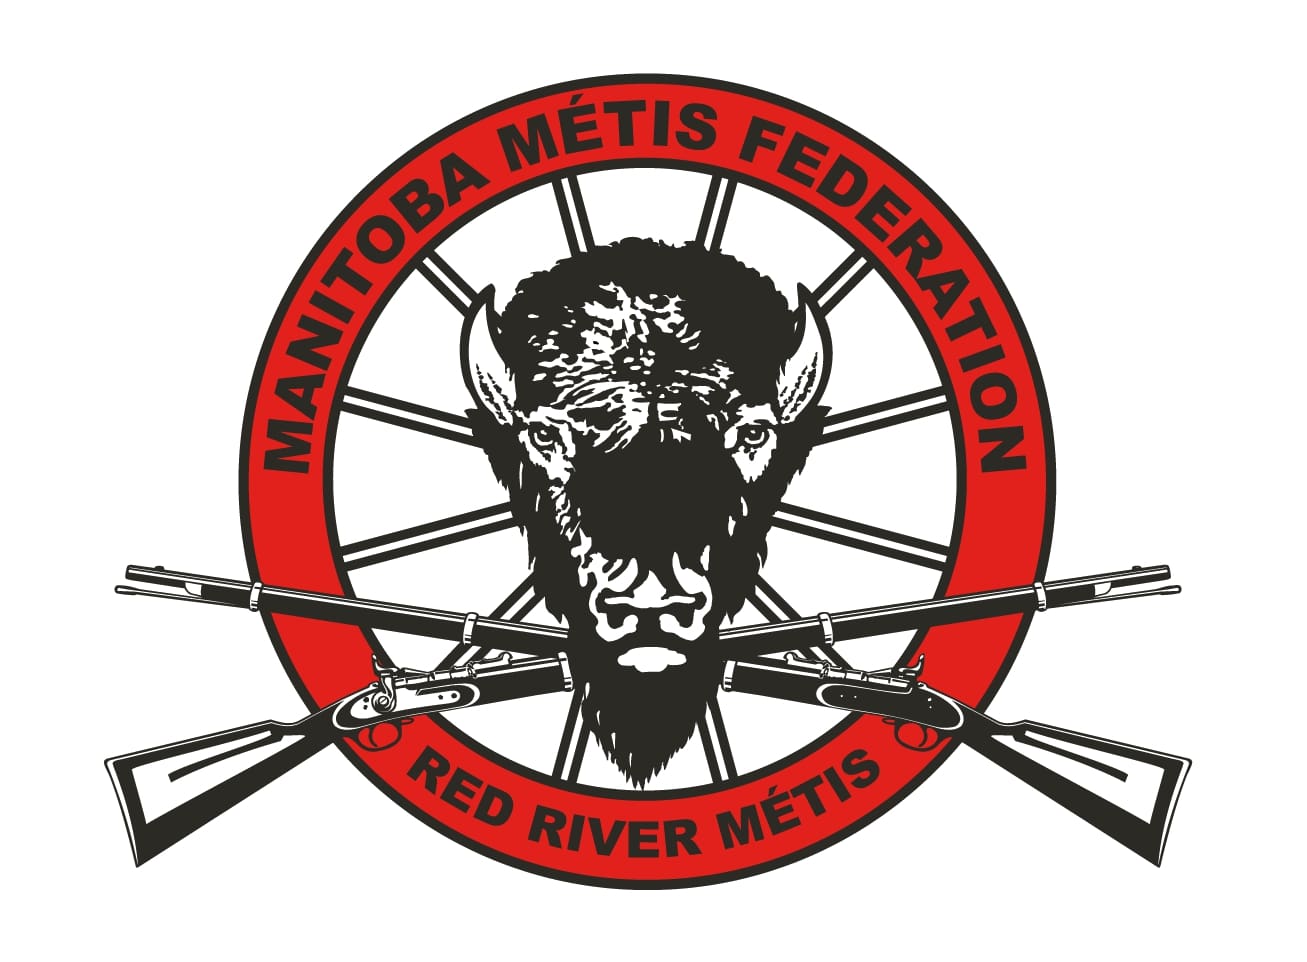 The Manitoba Métis Federation logo, with a bison head in the centre, two crossed rifles below it, interlocking wheel spokes behind it, outlined in a red ring with text reading Manitoba Métis Federation at the top and Red River Métis at the bottom.